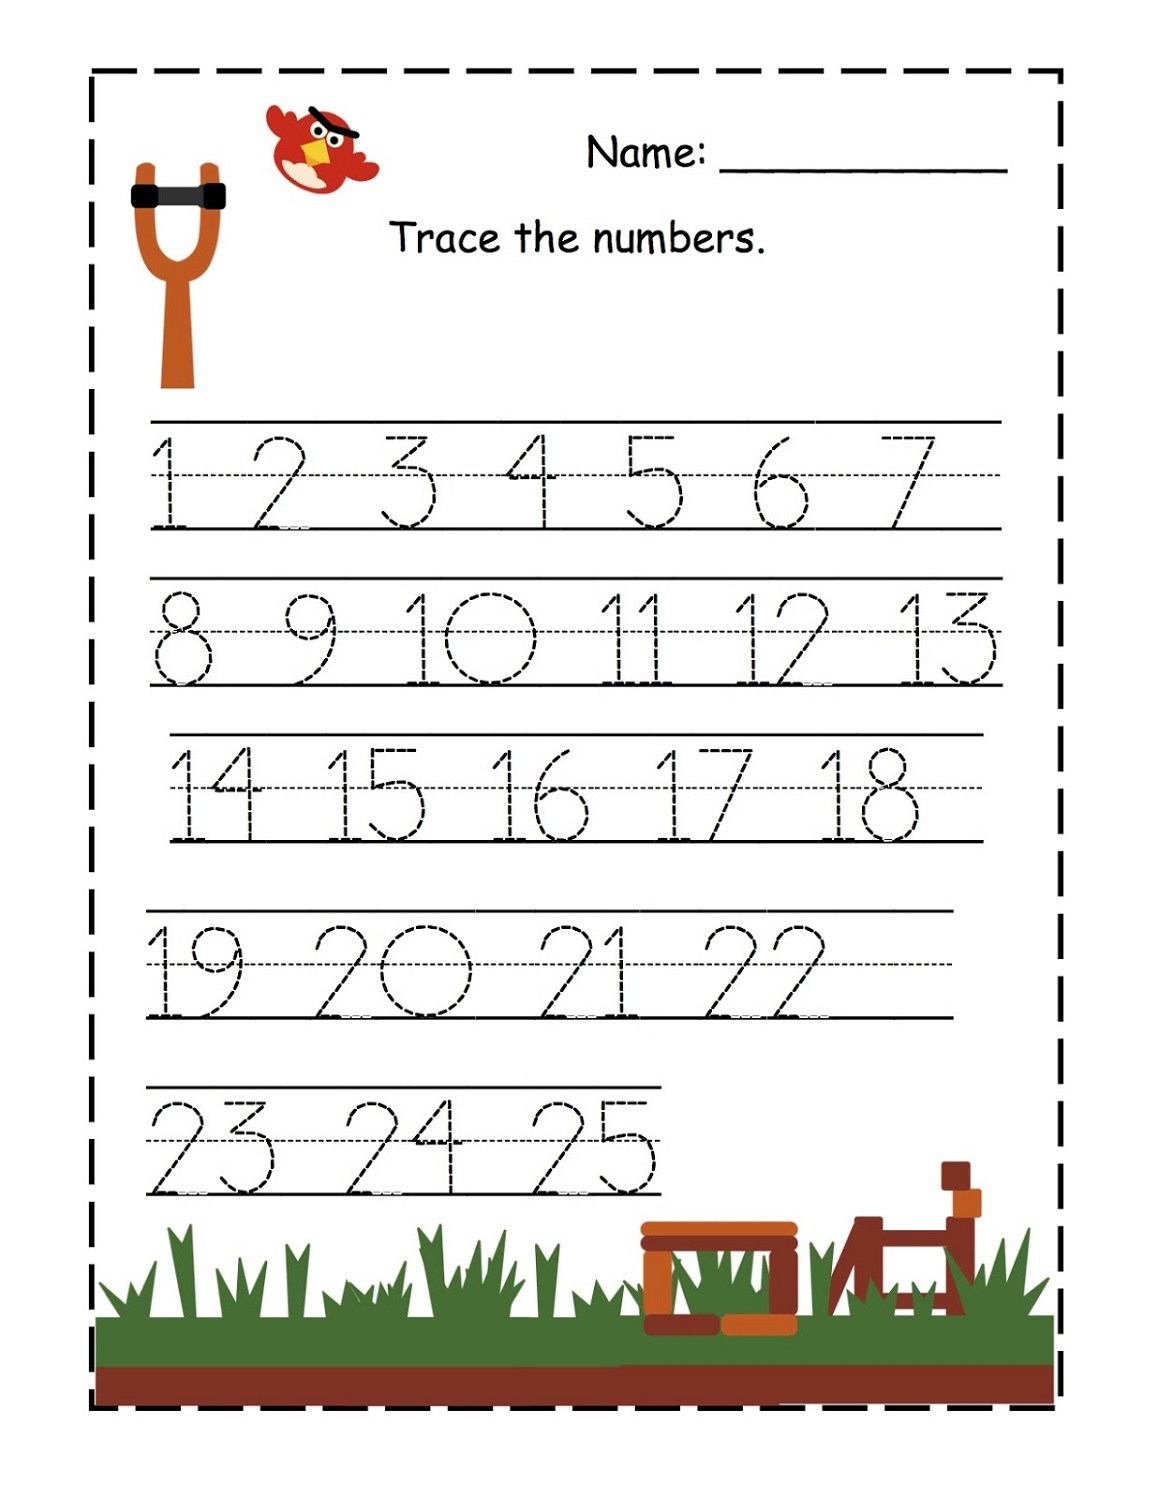 trace-number-worksheets-angry-birds